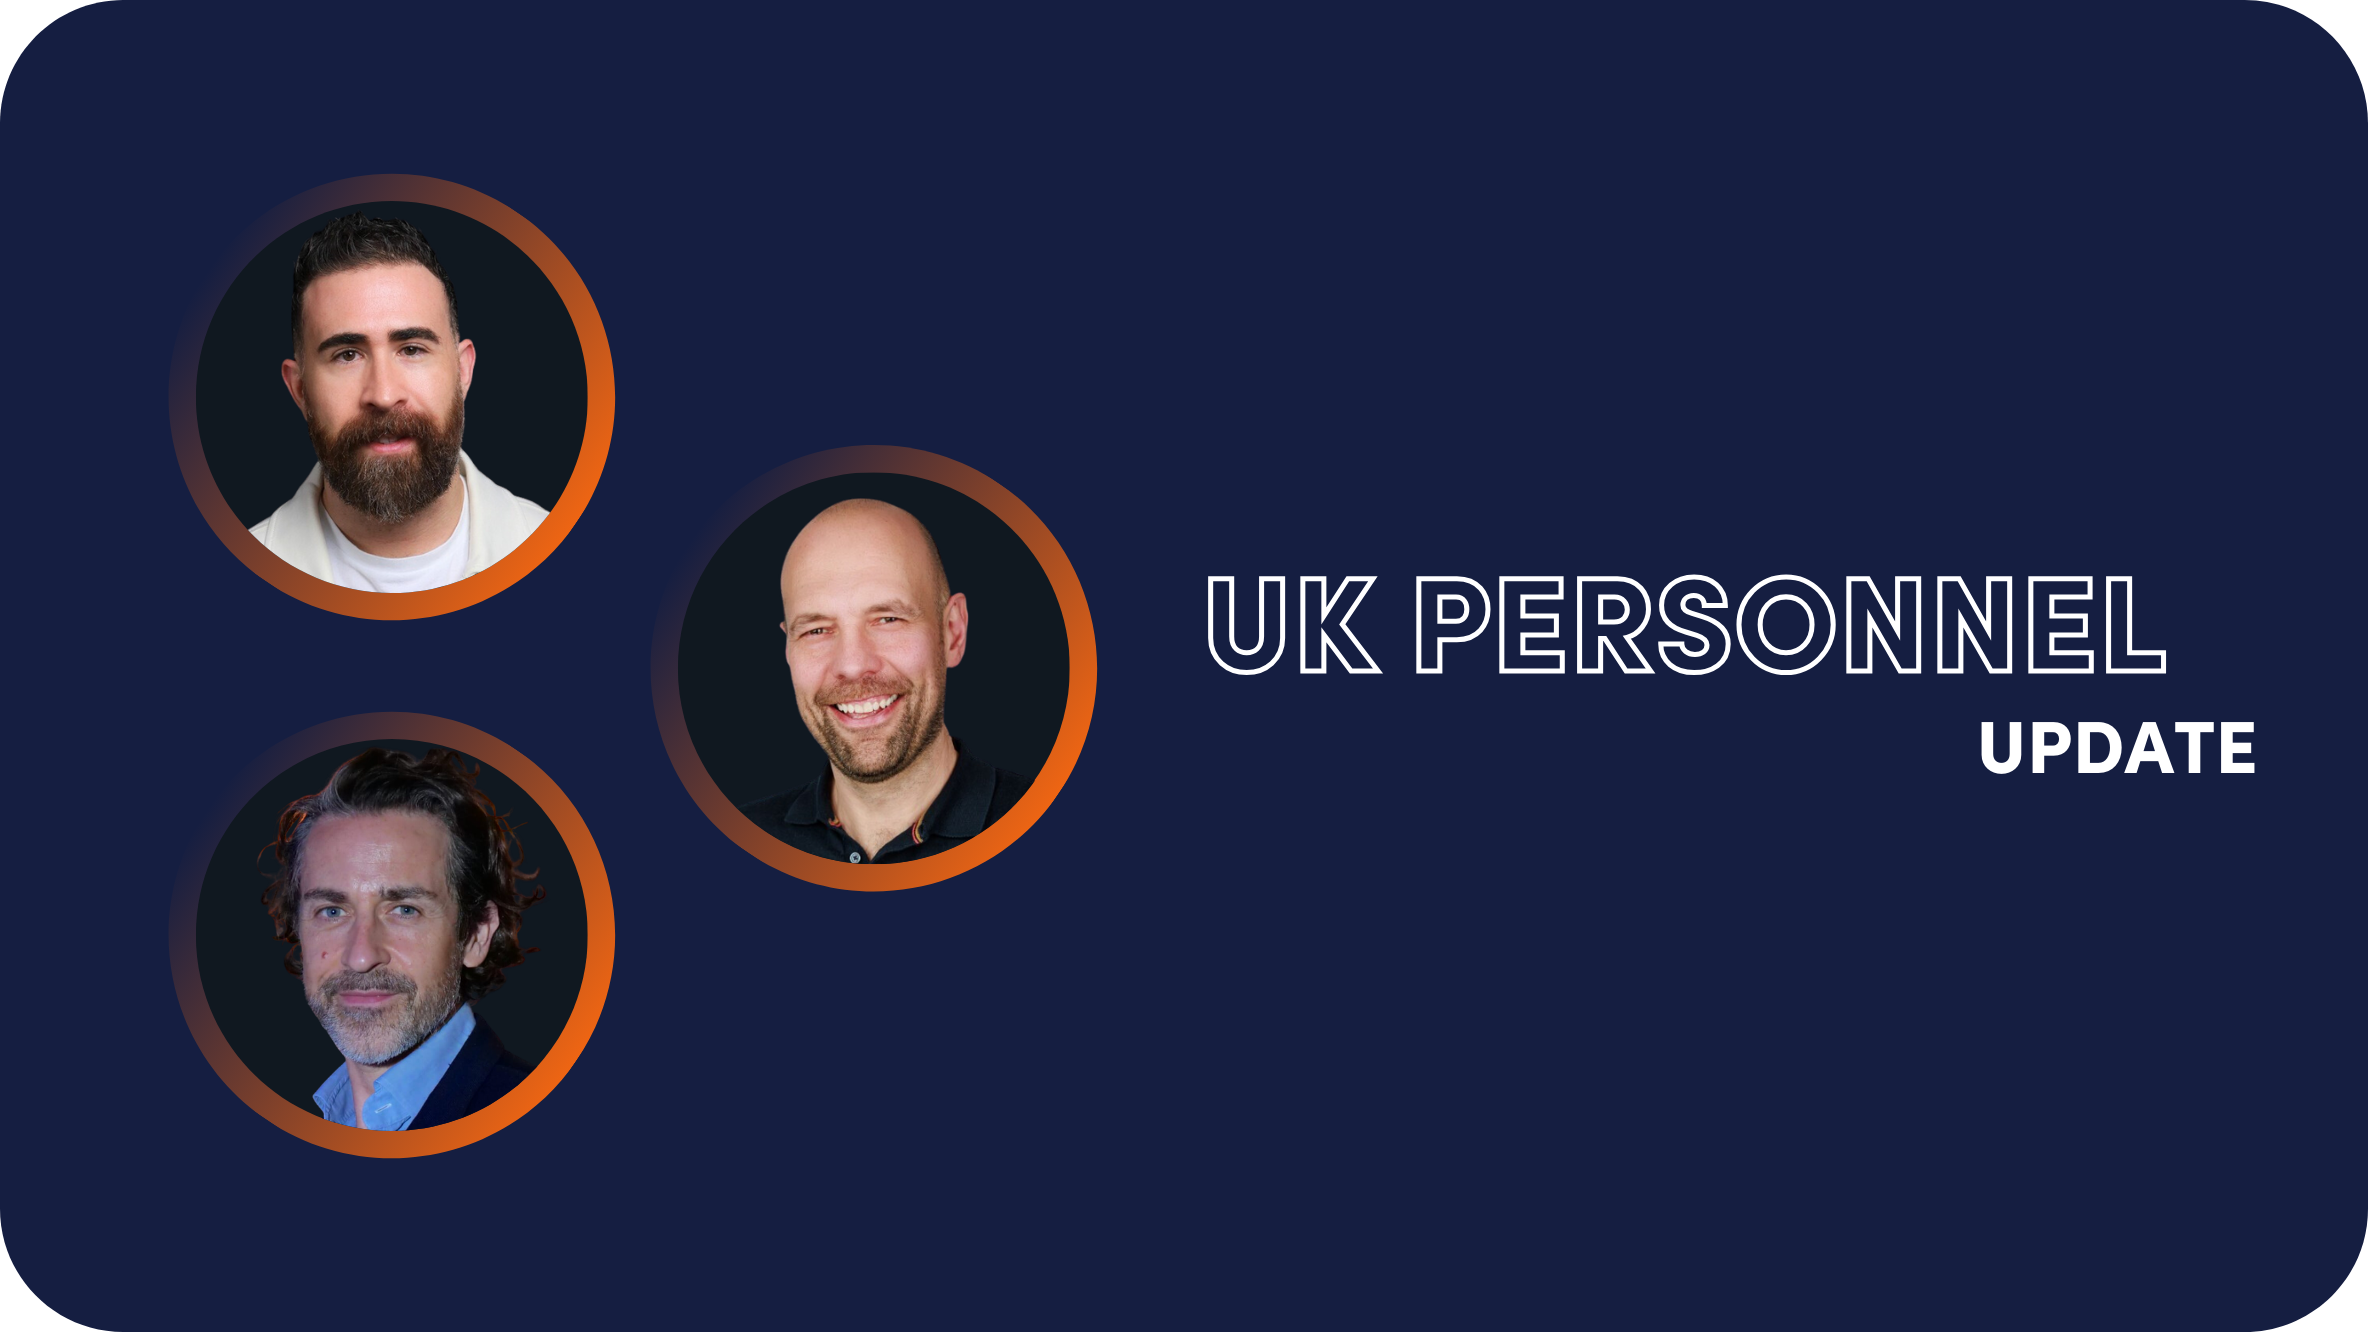 Outbrain Announces Senior UK New Hires and Promotions